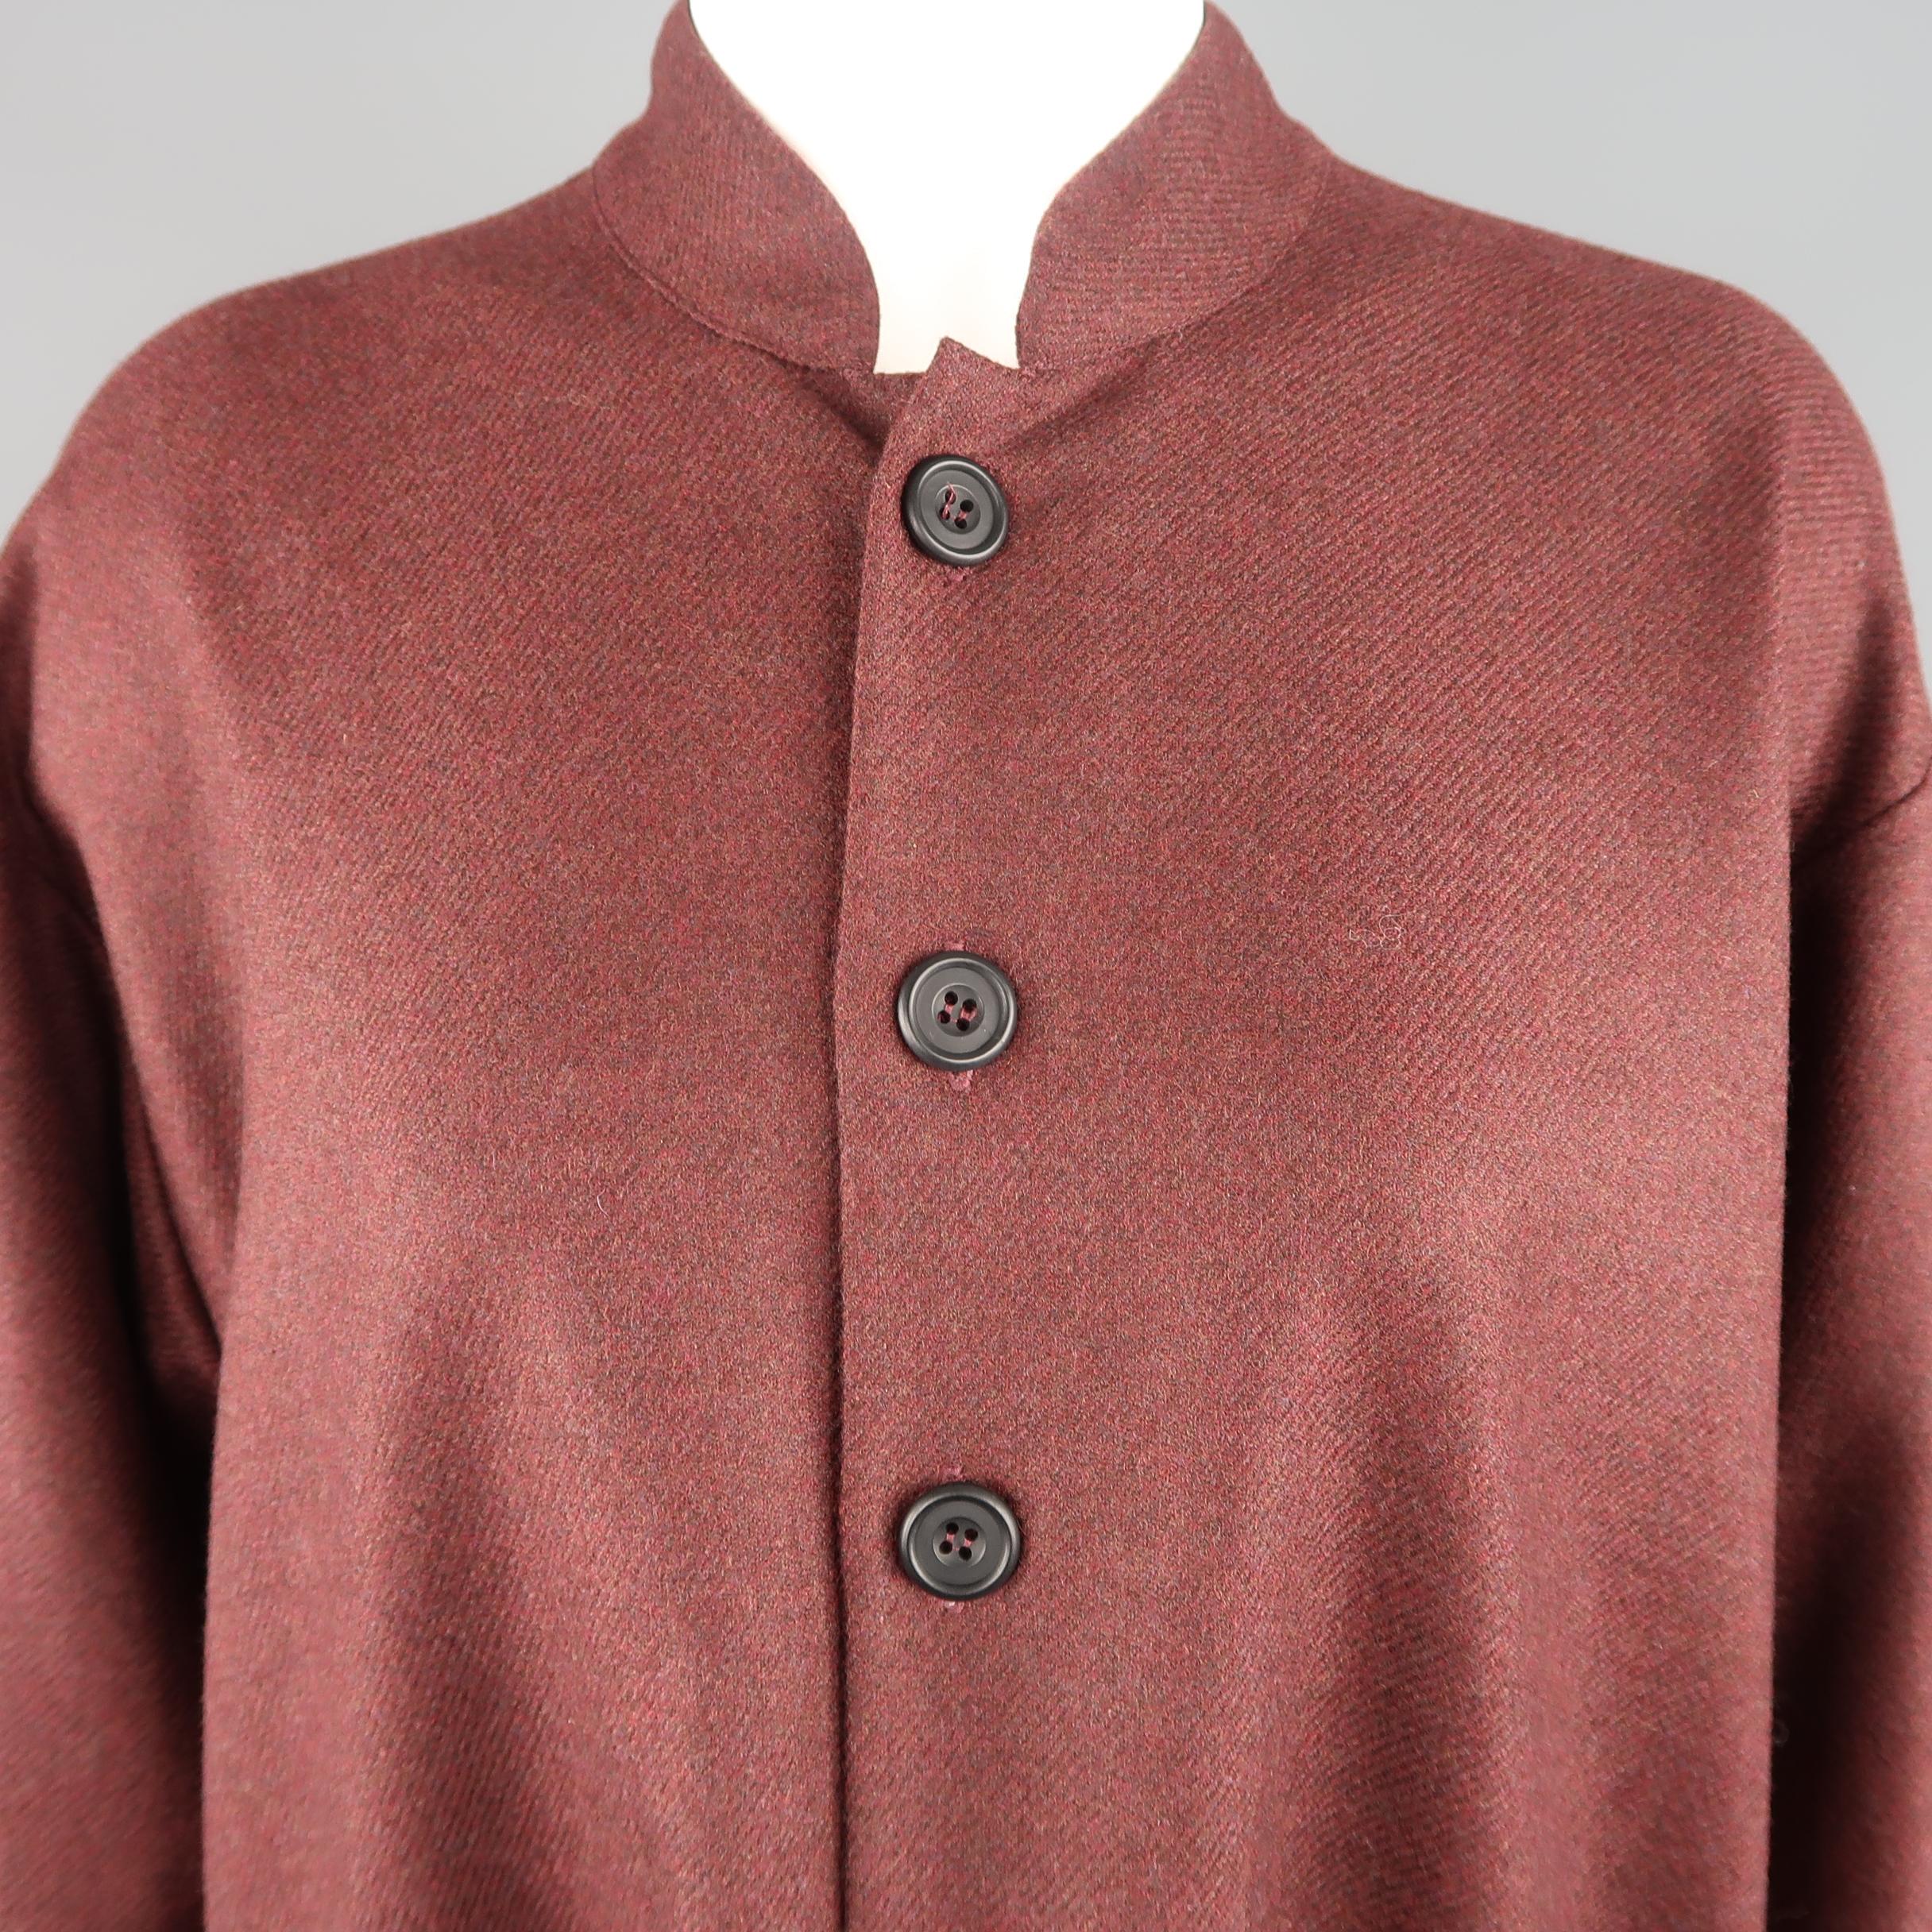 ESKANDAR coat comes in heathered burgundy wool cashmere twill textured felt with a stand up collar, button up front, oversized silhouette, and patch pockets.
 
Excellent Pre-Owned Condition.
Marked: 0
 
Measurements:
 
Shoulder: 21 in.
Bust: 46